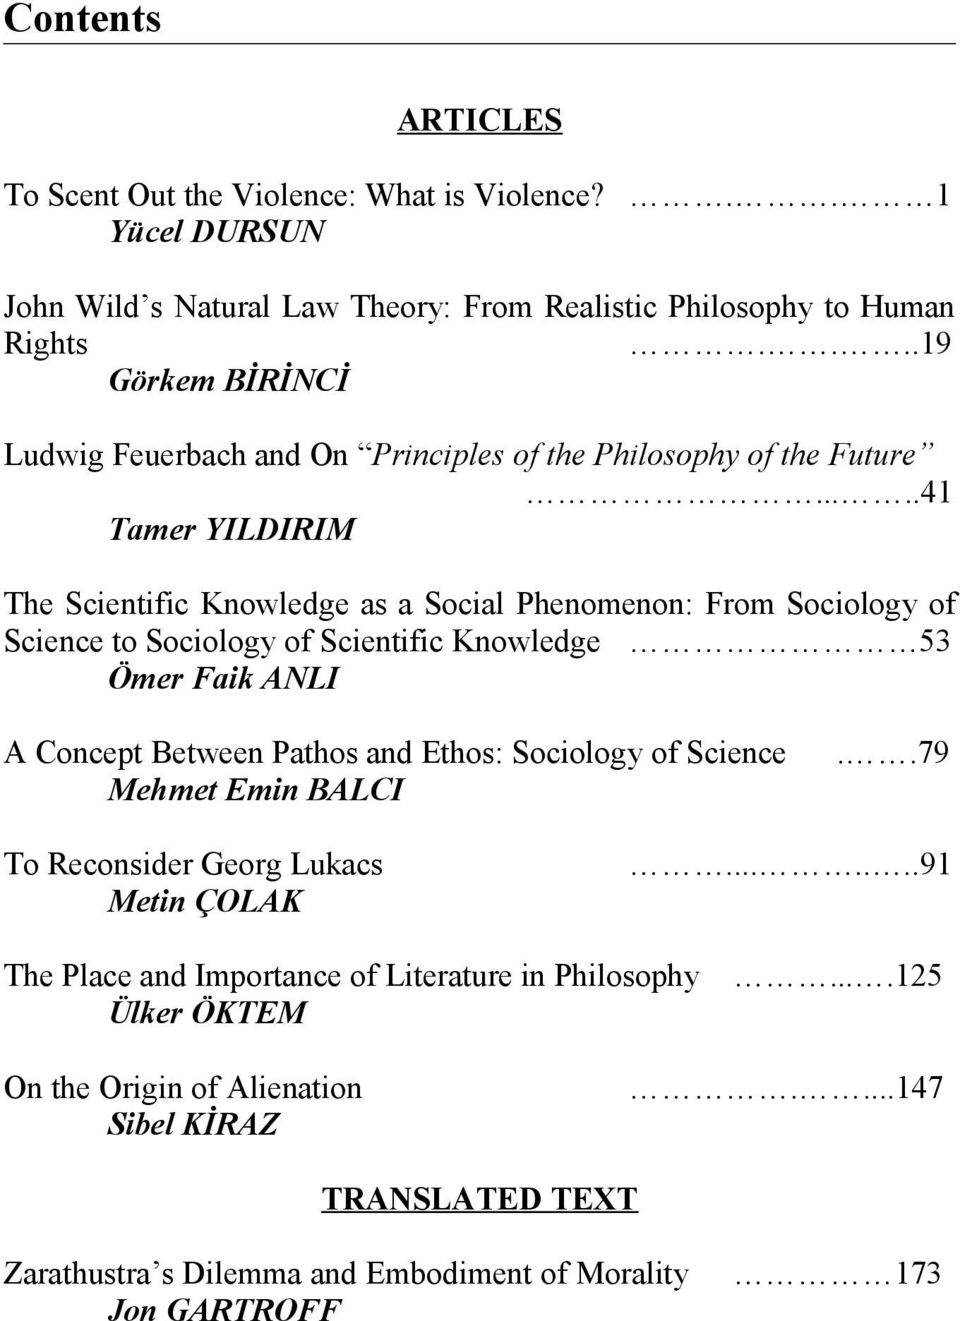 ....41 Tamer YILDIRIM The Scientific Knowledge as a Social Phenomenon: From Sociology of Science to Sociology of Scientific Knowledge 53 Ömer Faik ANLI A Concept Between Pathos and